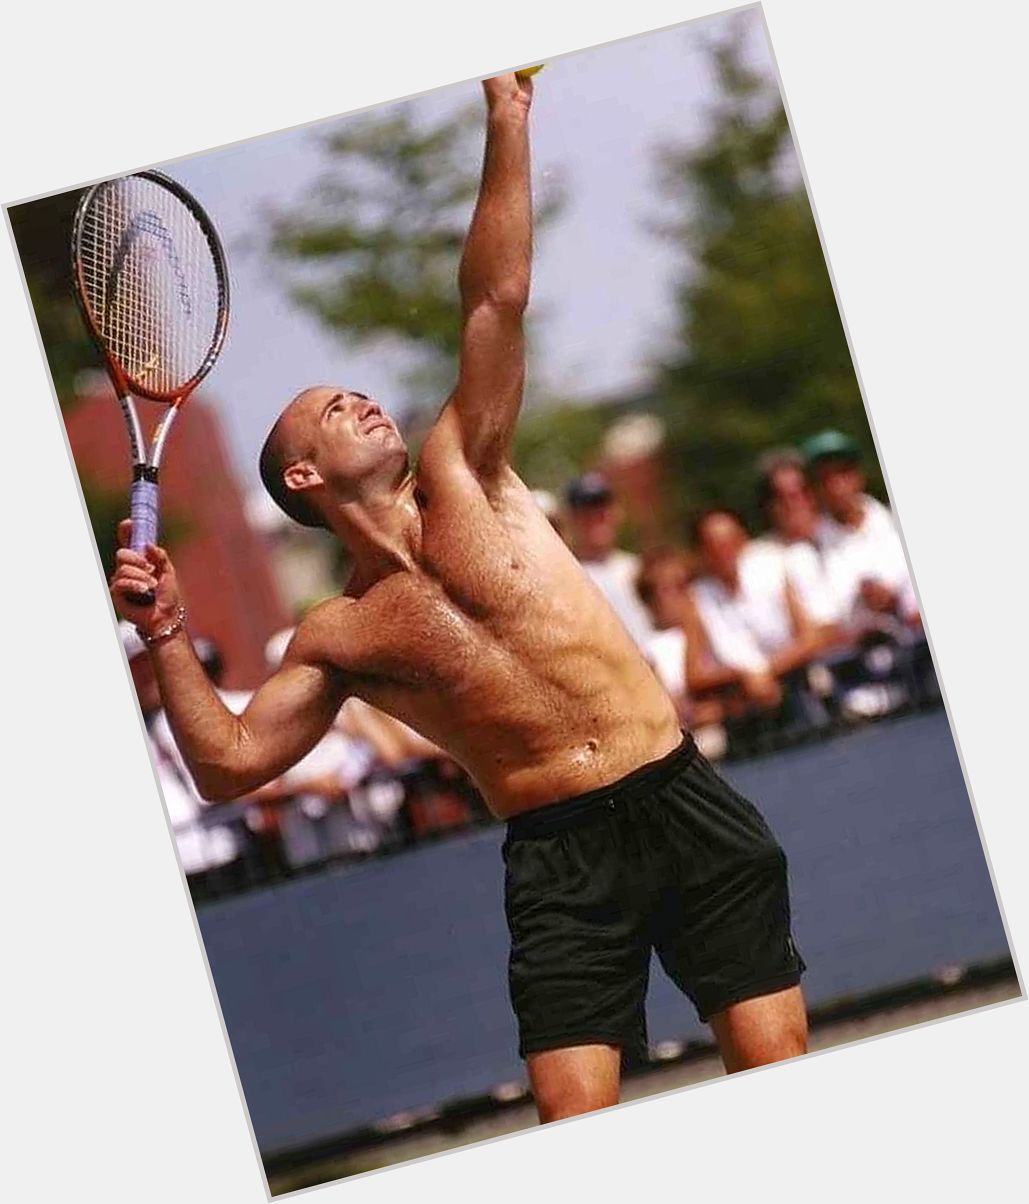 Happy Birthday to Andre Agassi who turns 53 today! 